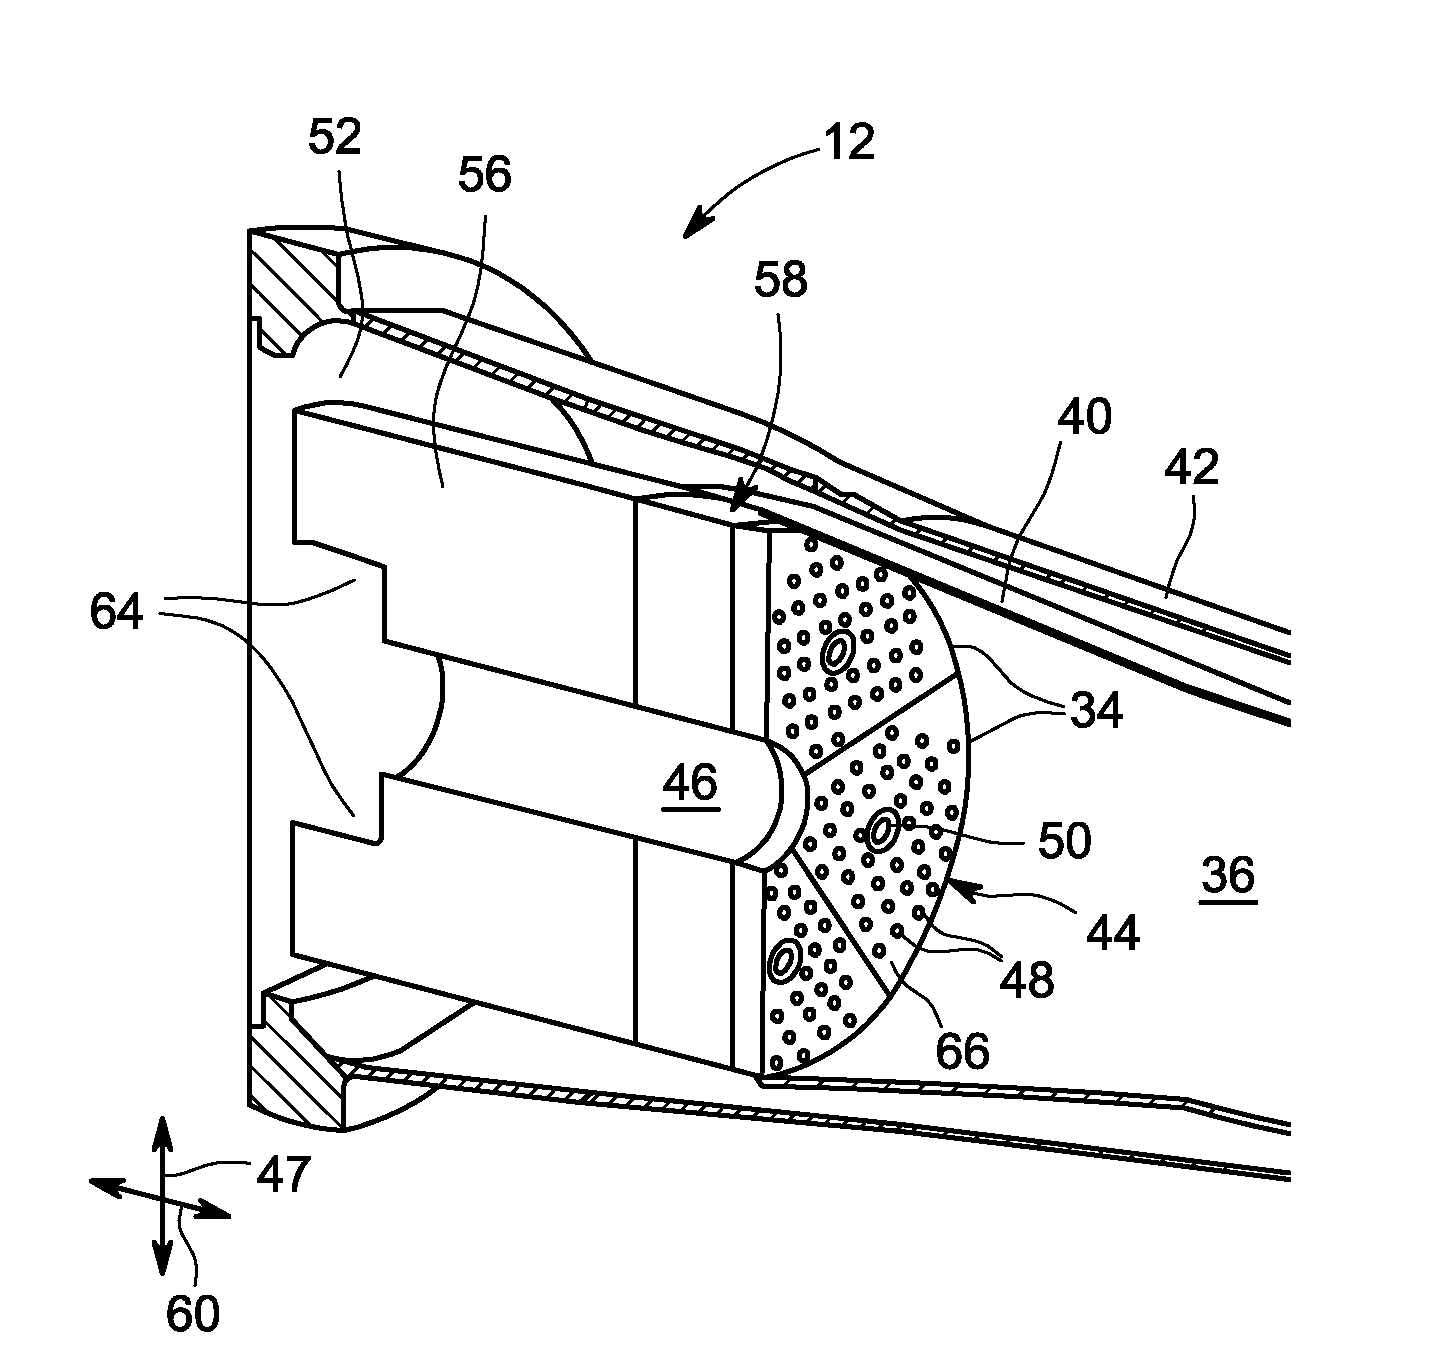 System for injecting fuel in a gas turbine combustor